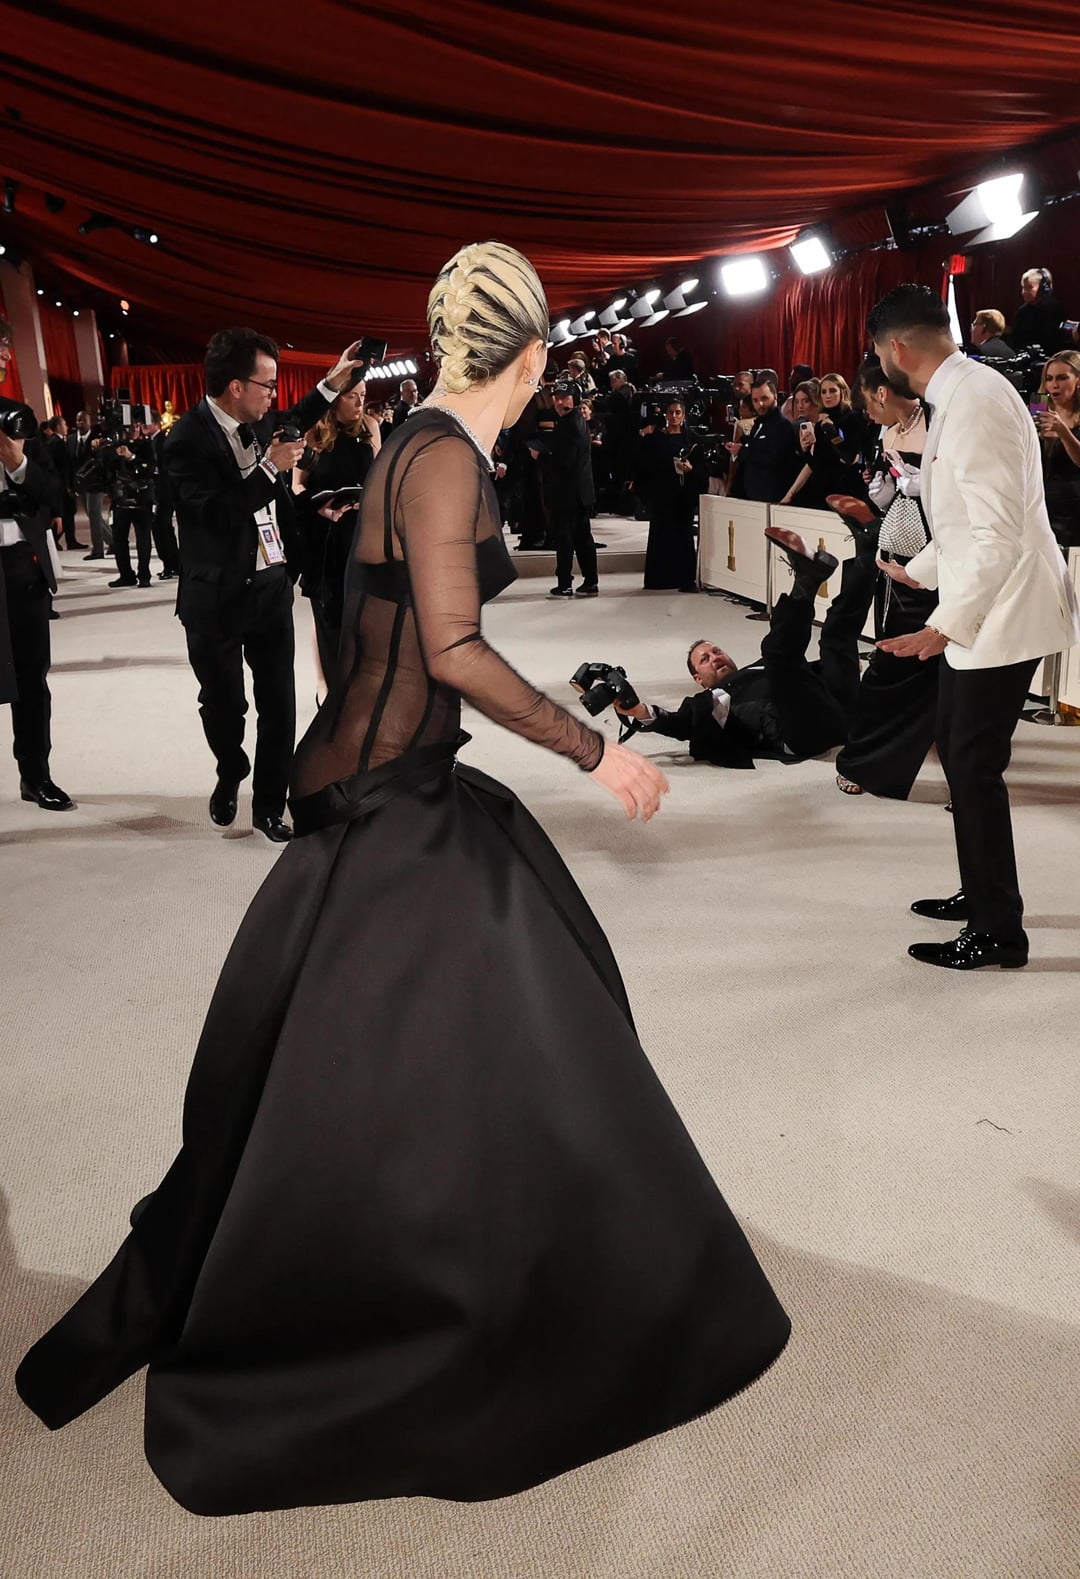 When Lady Gaga rushed to help the fallen photographer at the Oscar’s